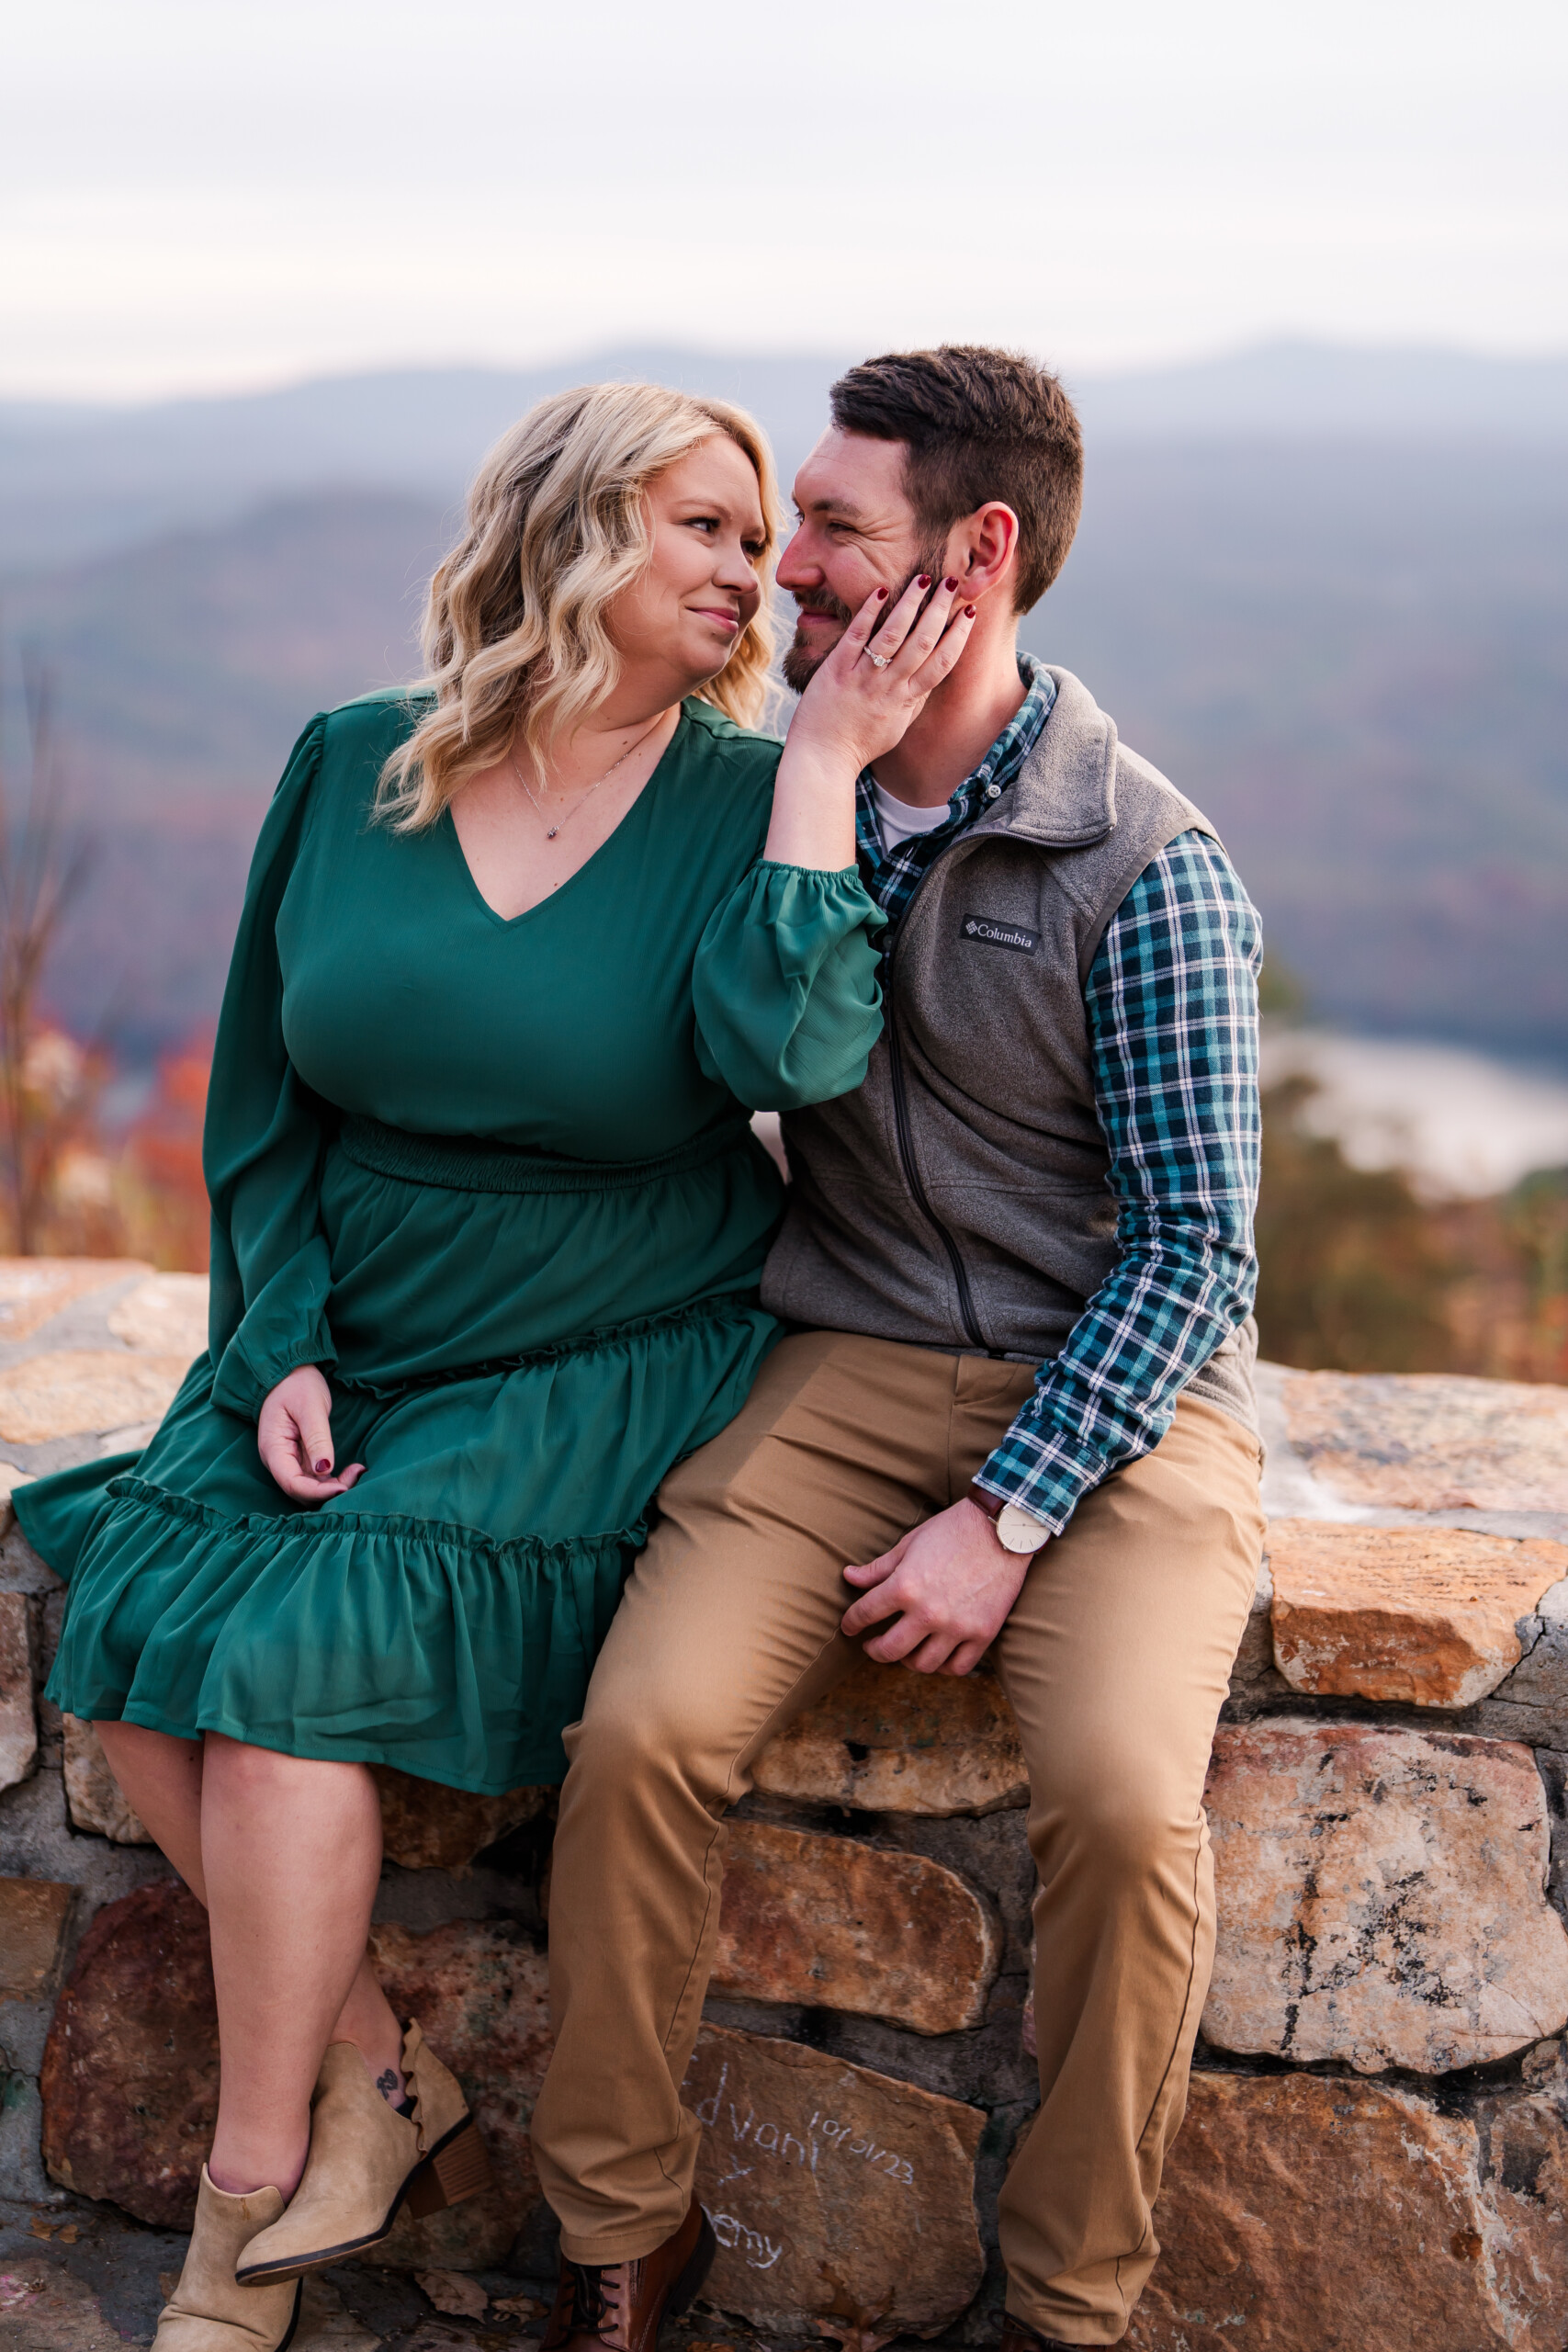 Chilhowee Overlook Engaged Couple